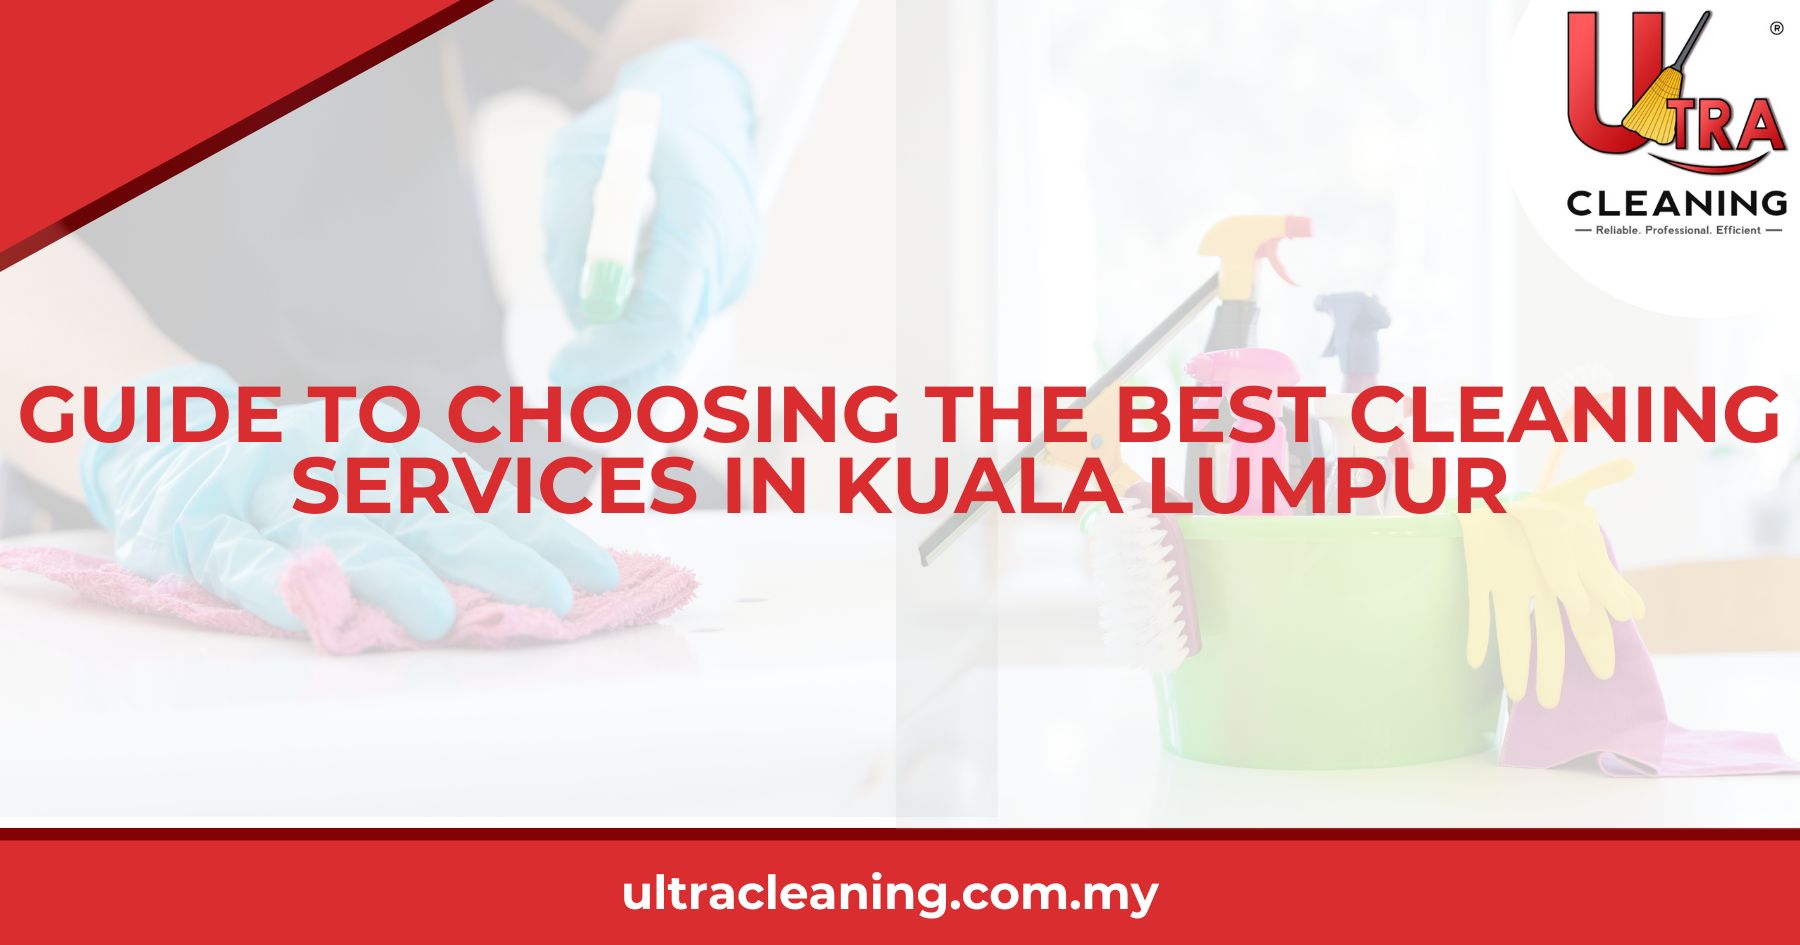 Guide to Choosing the Best Cleaning Services in Kuala Lumpur